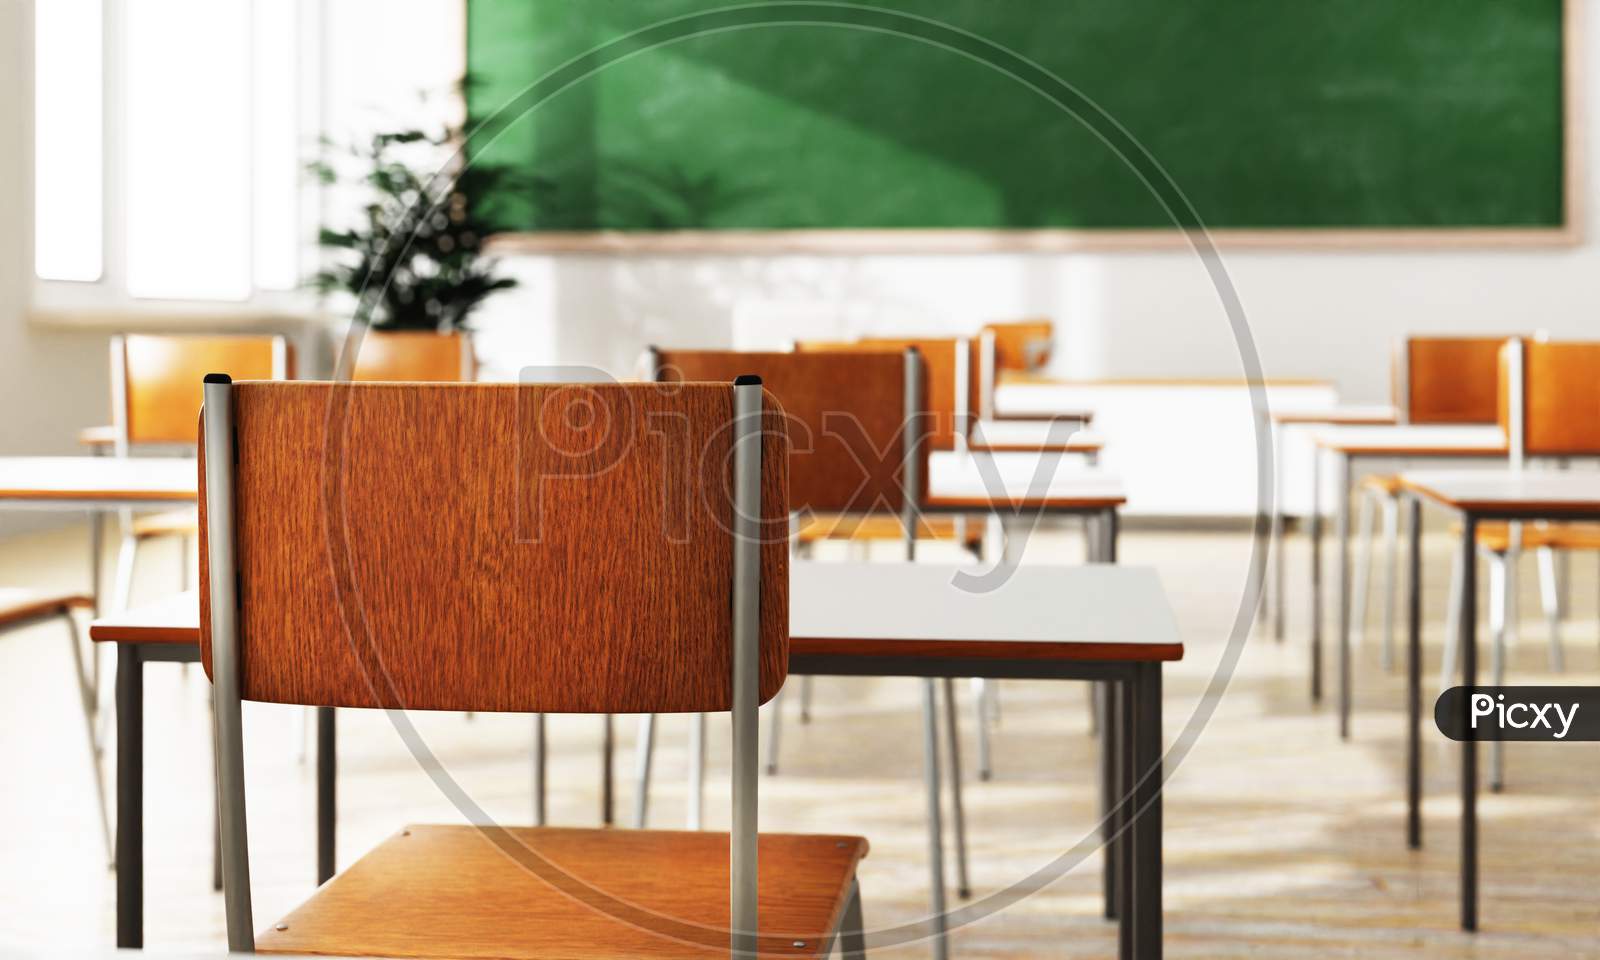 Closeup Student Chair Back Seat And Desk In Classroom Background With On Wooden Floor. Education And Back To School Concept. Architecture Interior. Social Distancing Theme. 3D Illustration Rendering